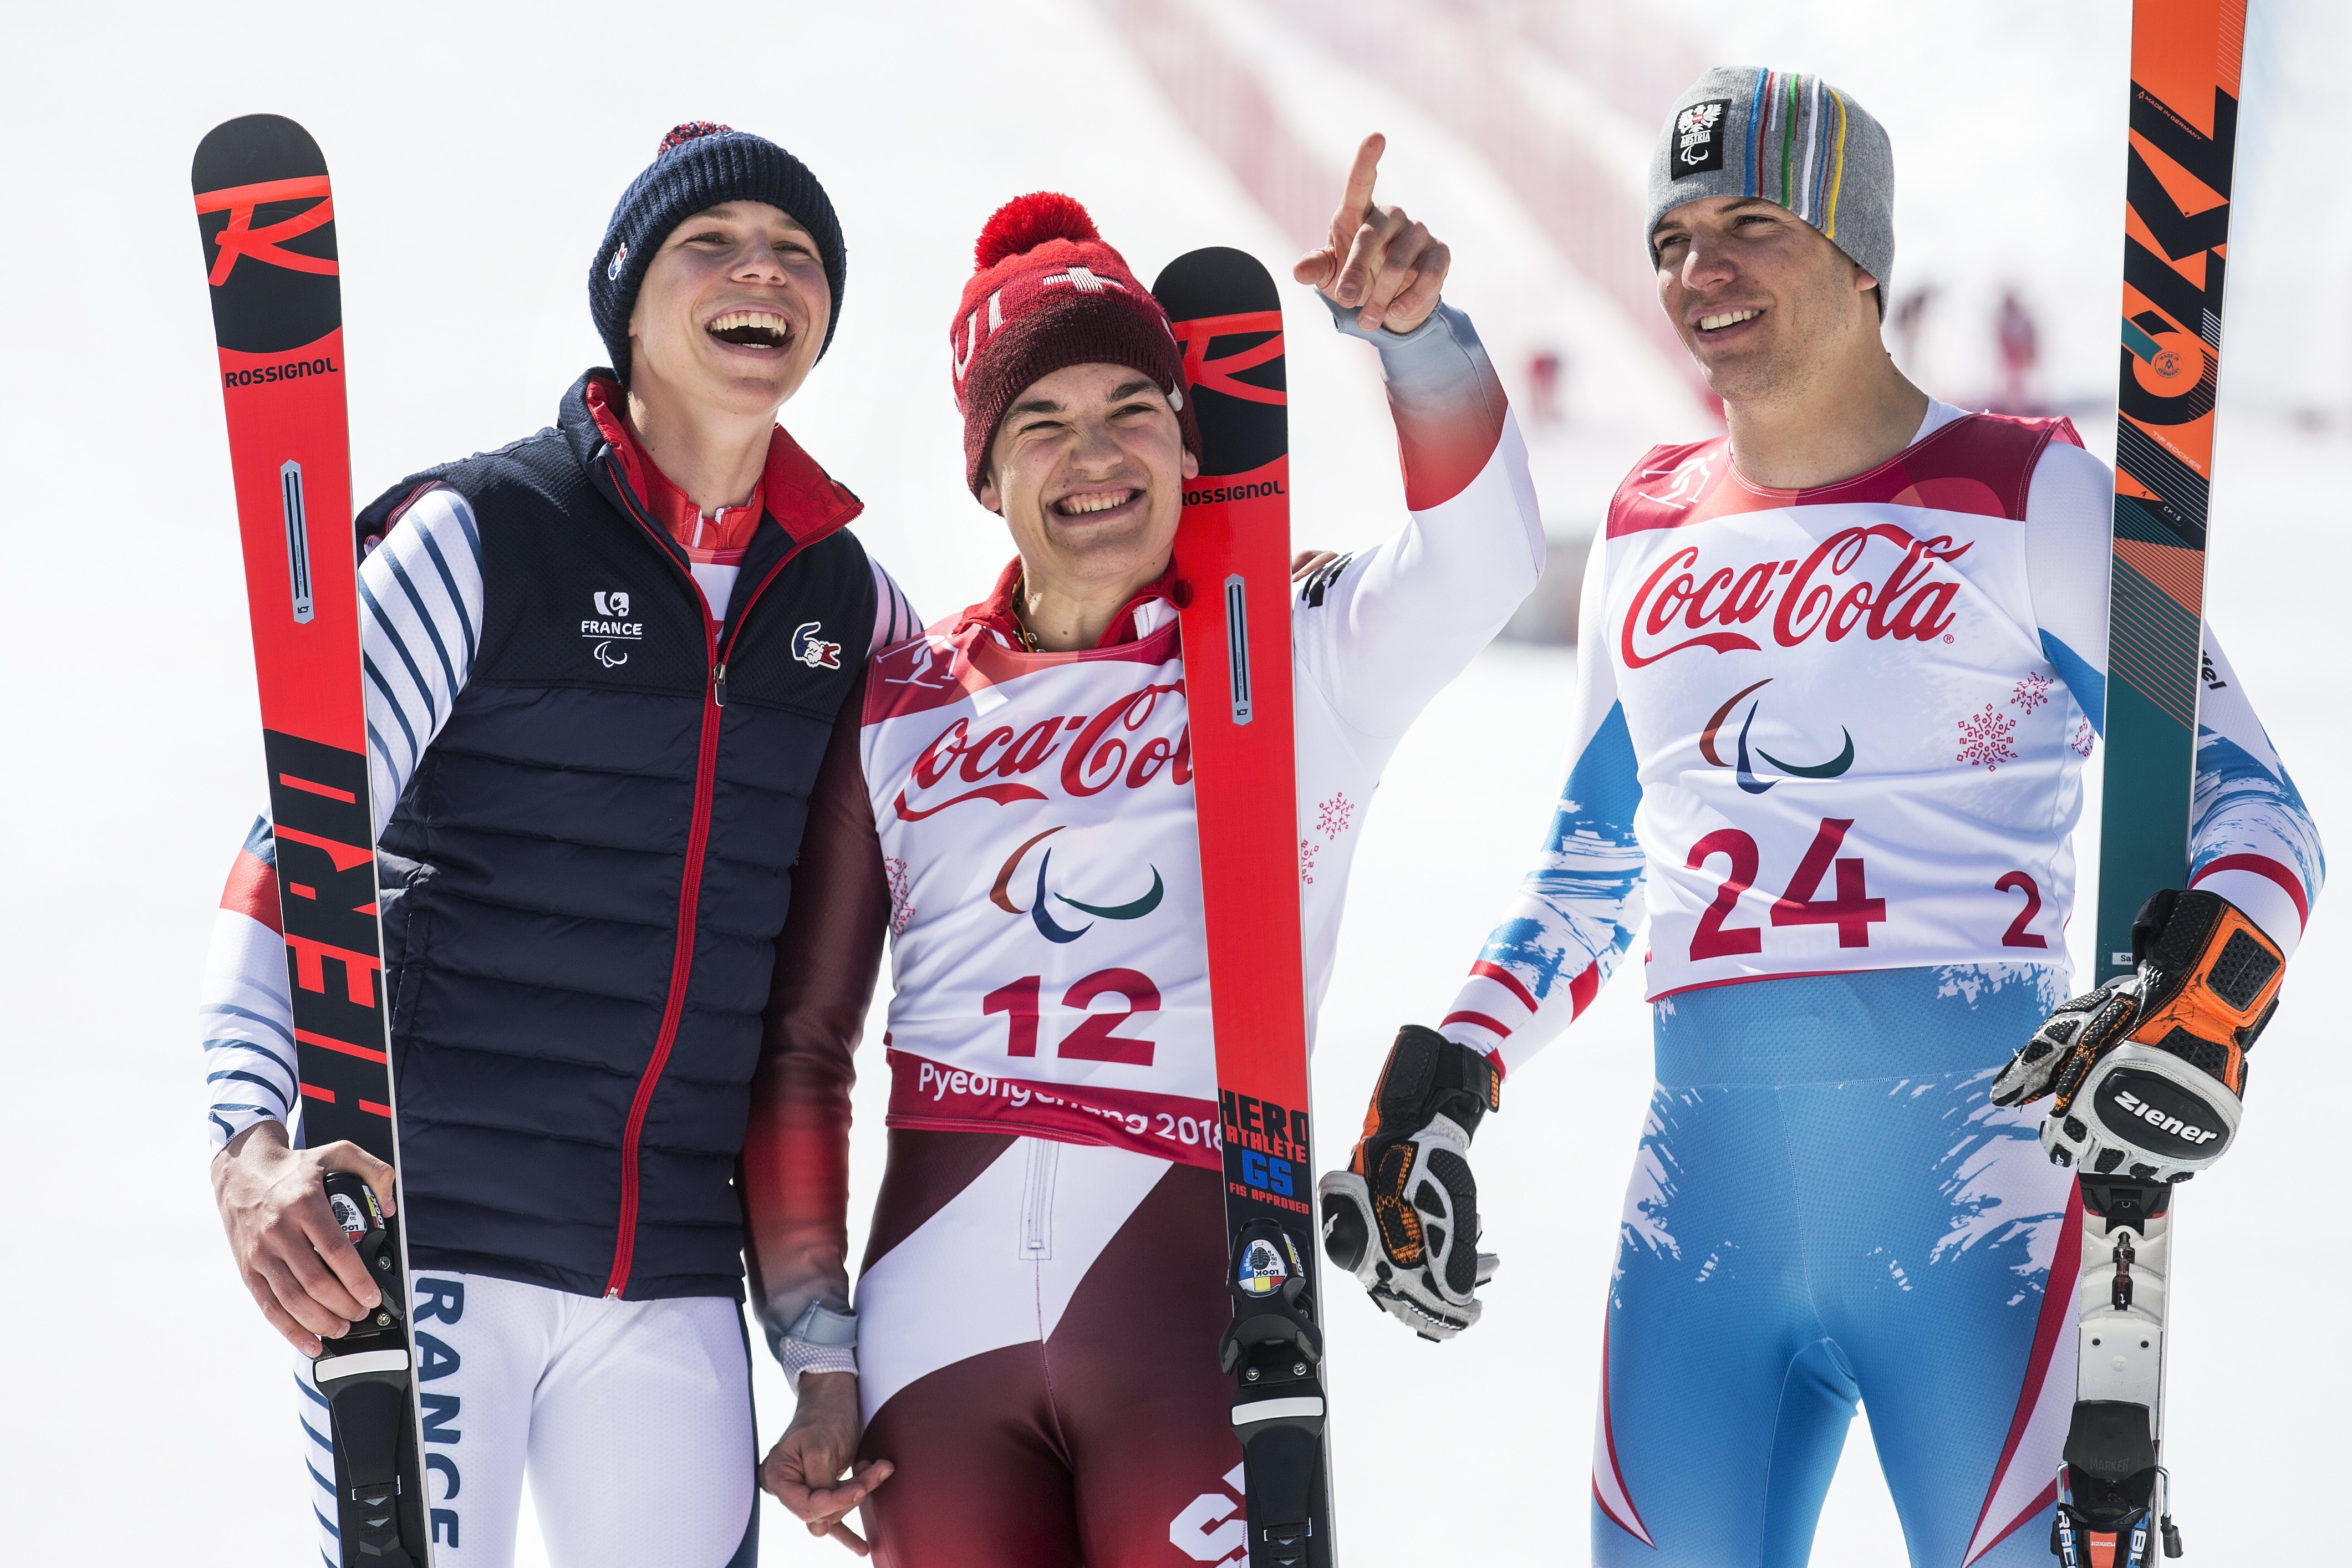 epa06592841 Silver medalist Arthur Bauchet of France, Gold medalist Theo Gmuer of Switzerland, and Bronze medalist Markus Salcher of Austria, from left, celebrate on the podium after the men Alpine Skiing downhill Standing race in the Jeongseon Alpine Center during the Winter Paralympics 2018 in Pyeongchang, South Korea, 10 March 2018.  EPA/ALEXANDRA WEY